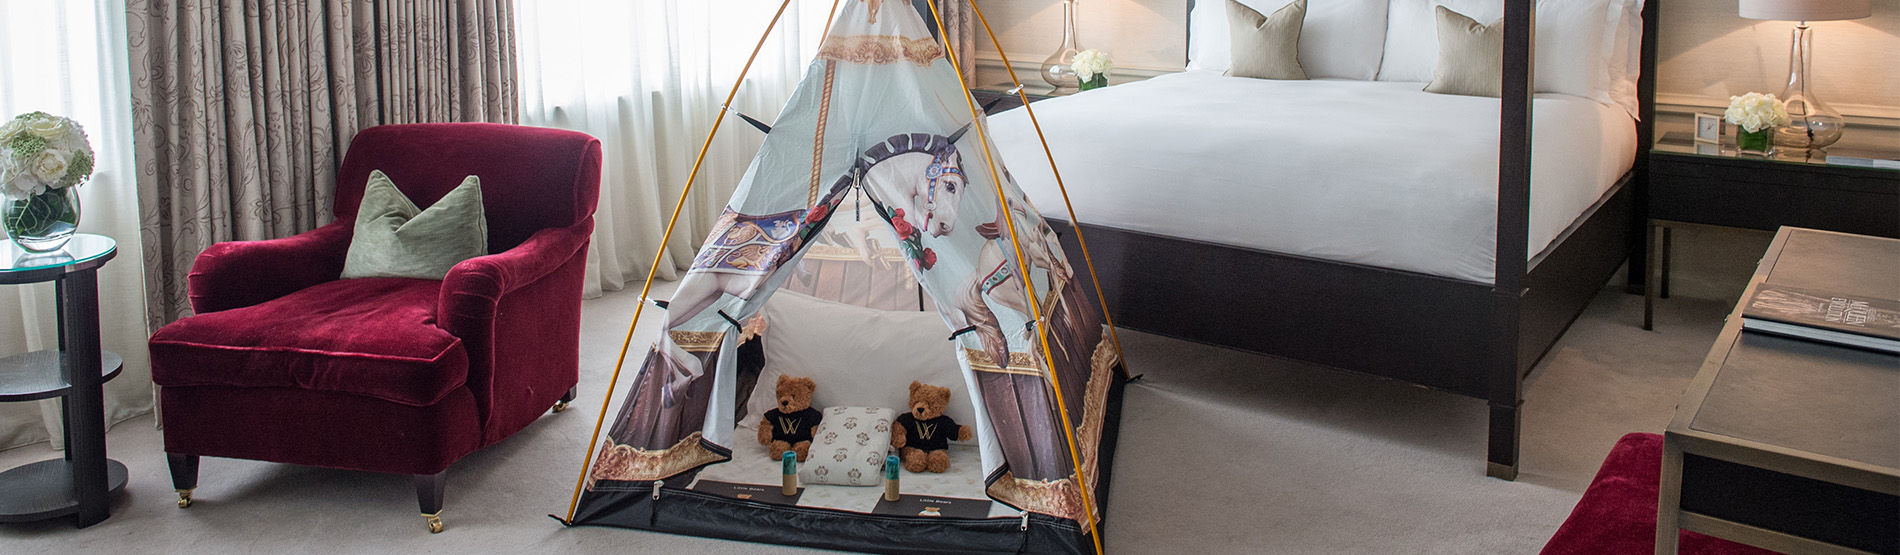 a tepee set up in a room with a Four Poster bed in The Westbury hotel in Dublin